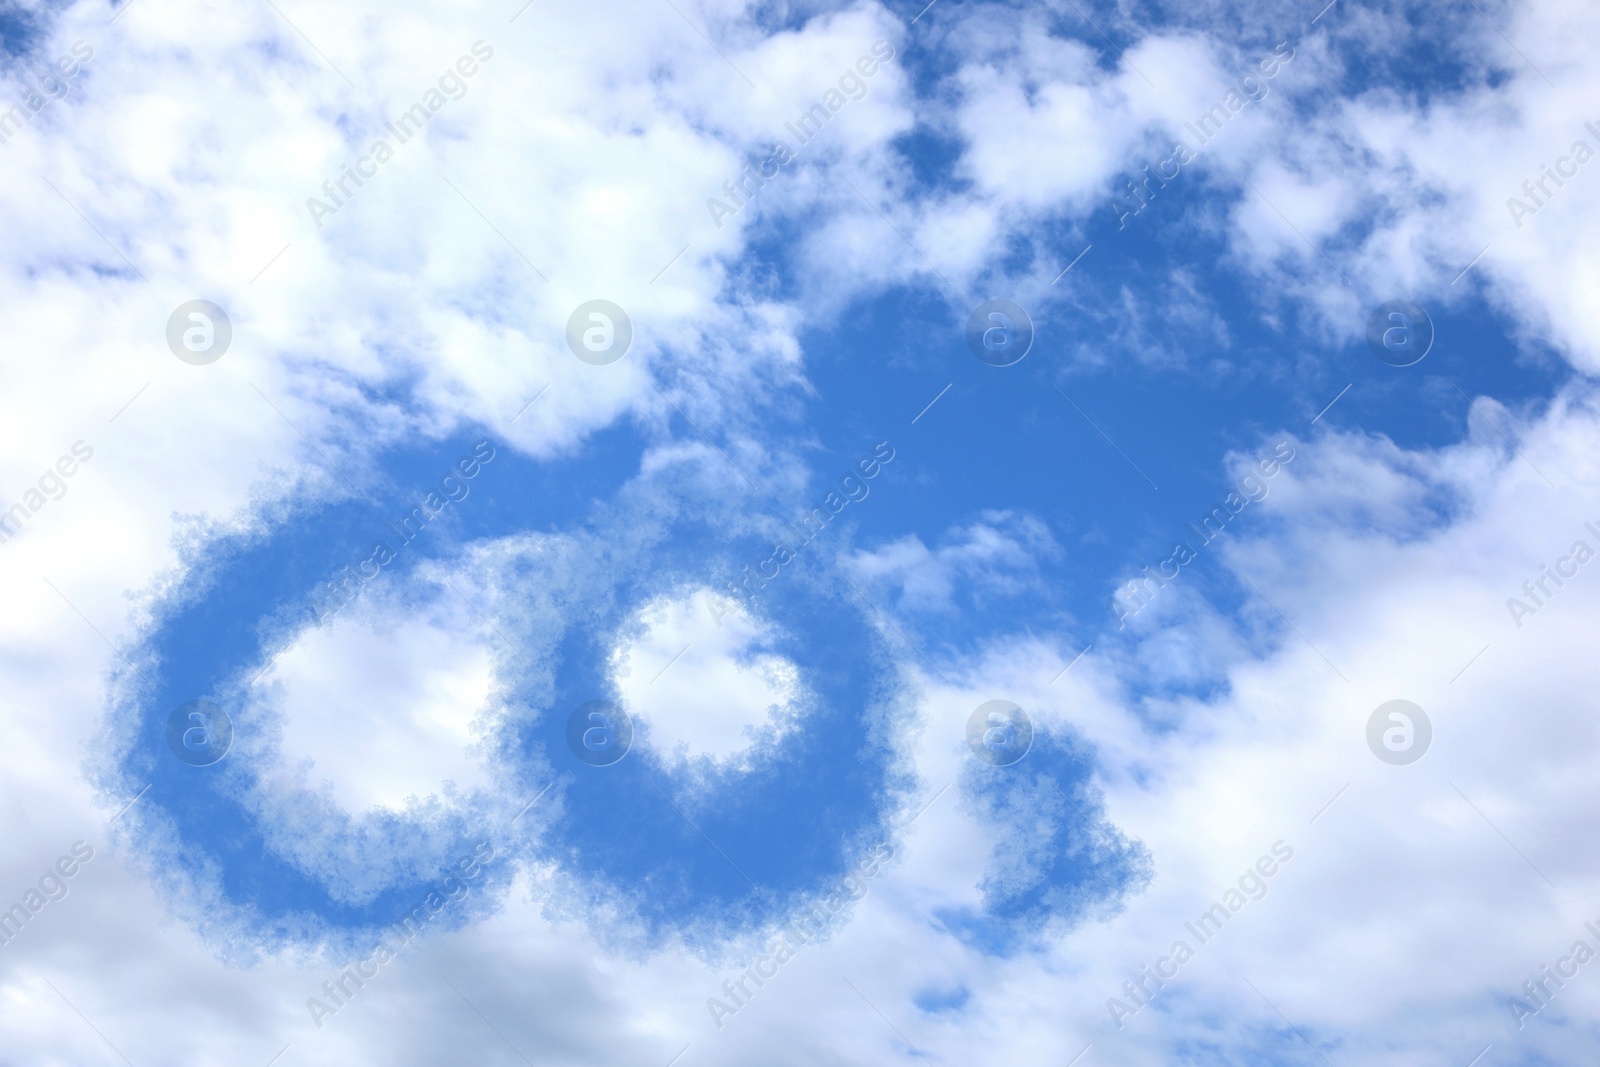 Image of Blue sky with CO2 chemical formula and clouds. Carbon dioxide emissions